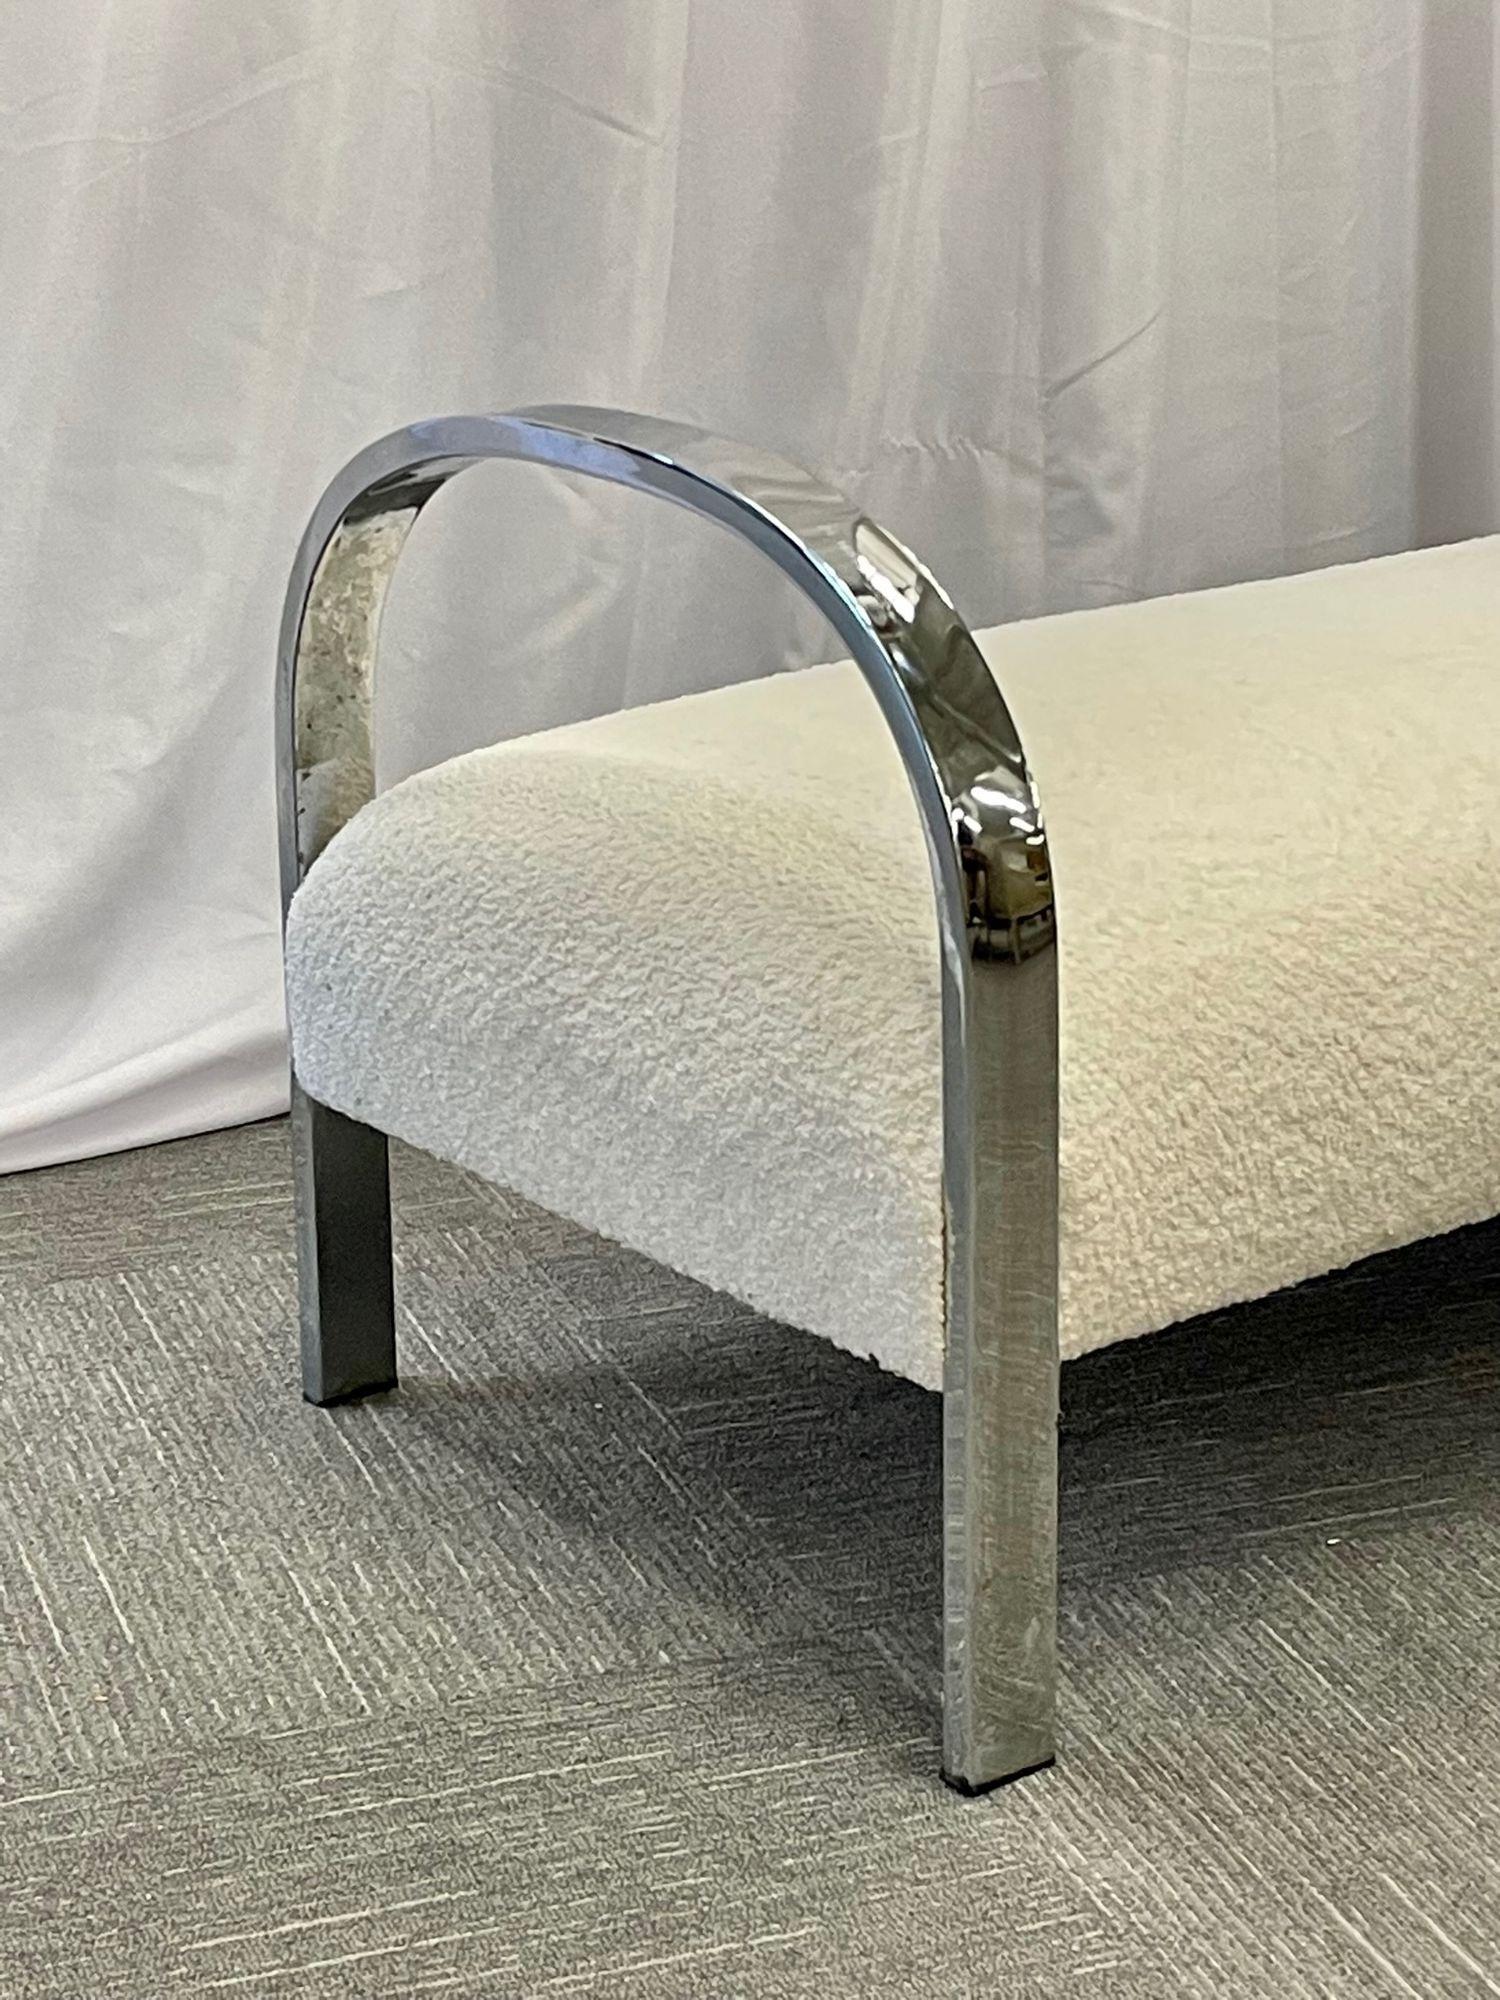 Mid-Century Modern Milo Baughman Style bench / daybed / Chaise, Chrome, Boucle
 
Organic form American design mid-century style bench newly upholstered in a thick, nubby white boucle upholstery. The bench is flanked by two free form chrome